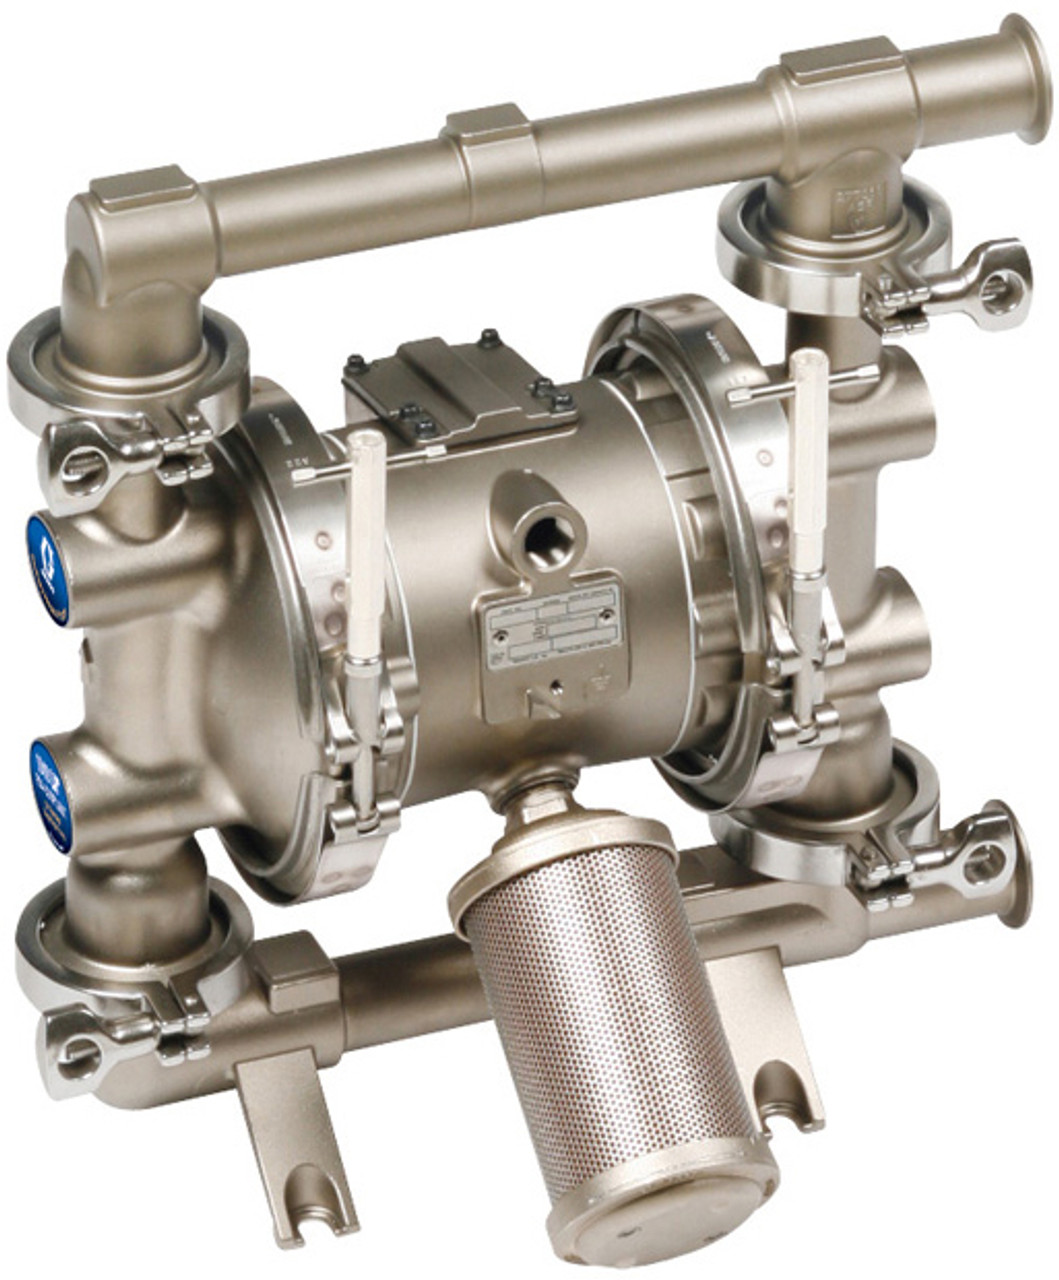 Graco 1040 FDA-Compliant 1 1/2 in. Double Diaphragm Sanitary Pumps w/ PTFE  O-Rings & Balls, Overmolded PTFE Diaphragm